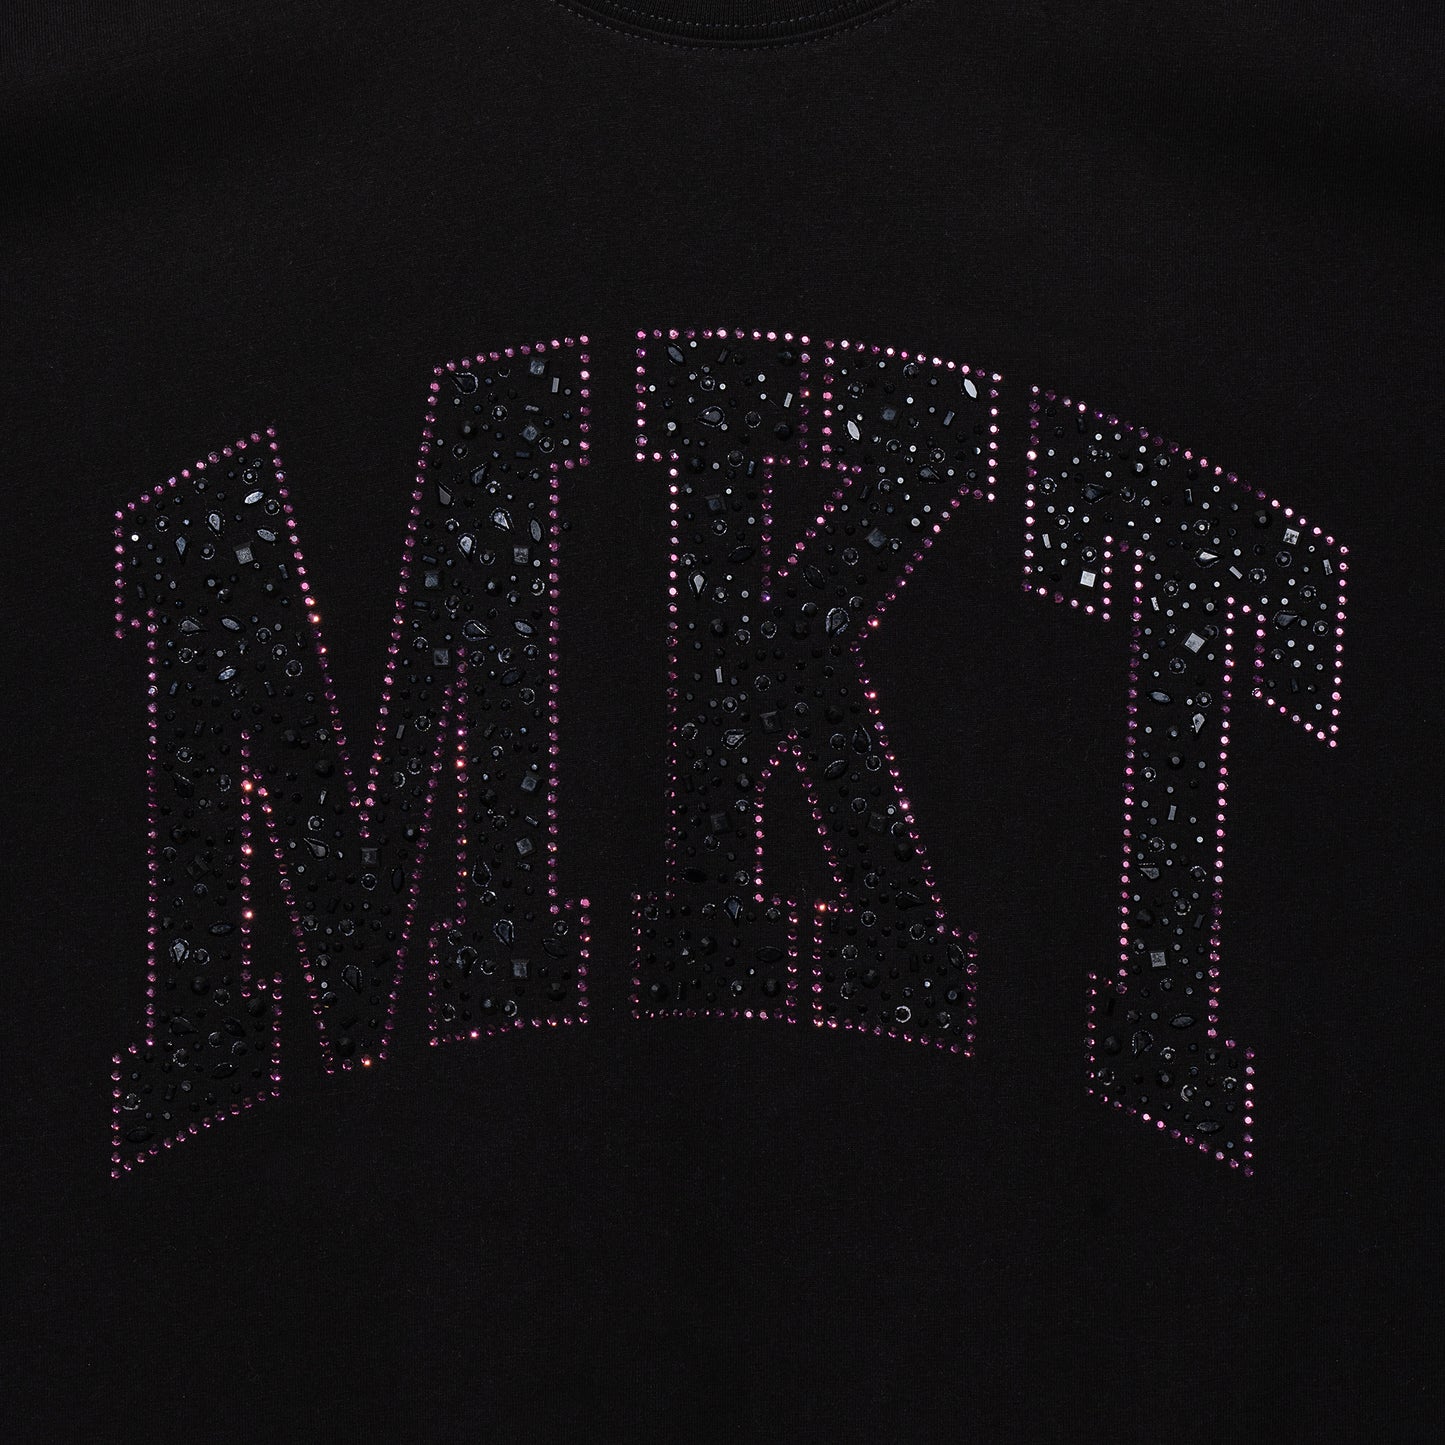 MARKET clothing brand MKT RHINESTONE ARC T-SHIRT. Find more graphic tees, hats, hoodies and more at MarketStudios.com. Formally Chinatown Market.